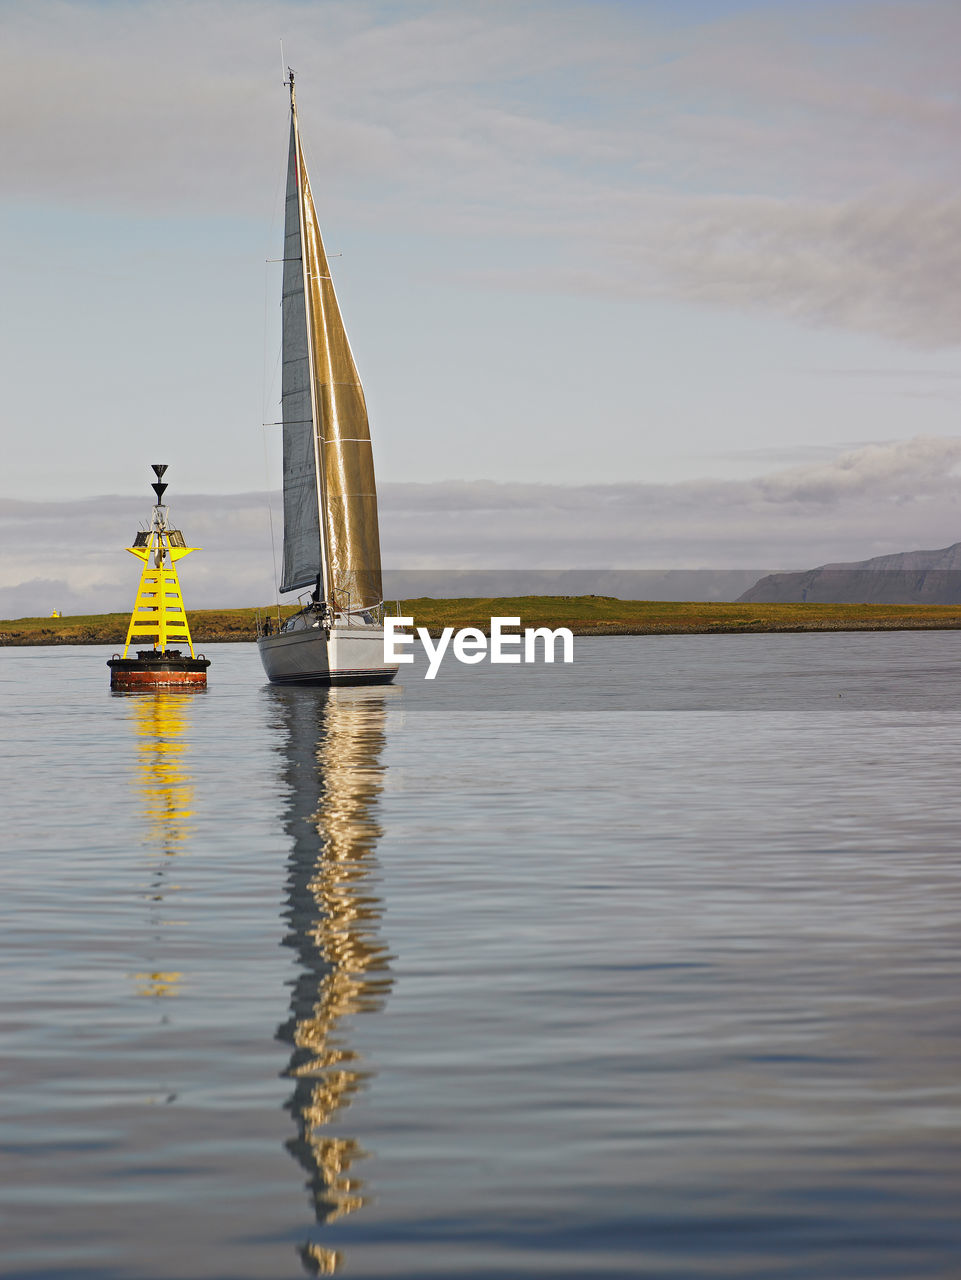 Sailboat in calm weather close to reykjavik